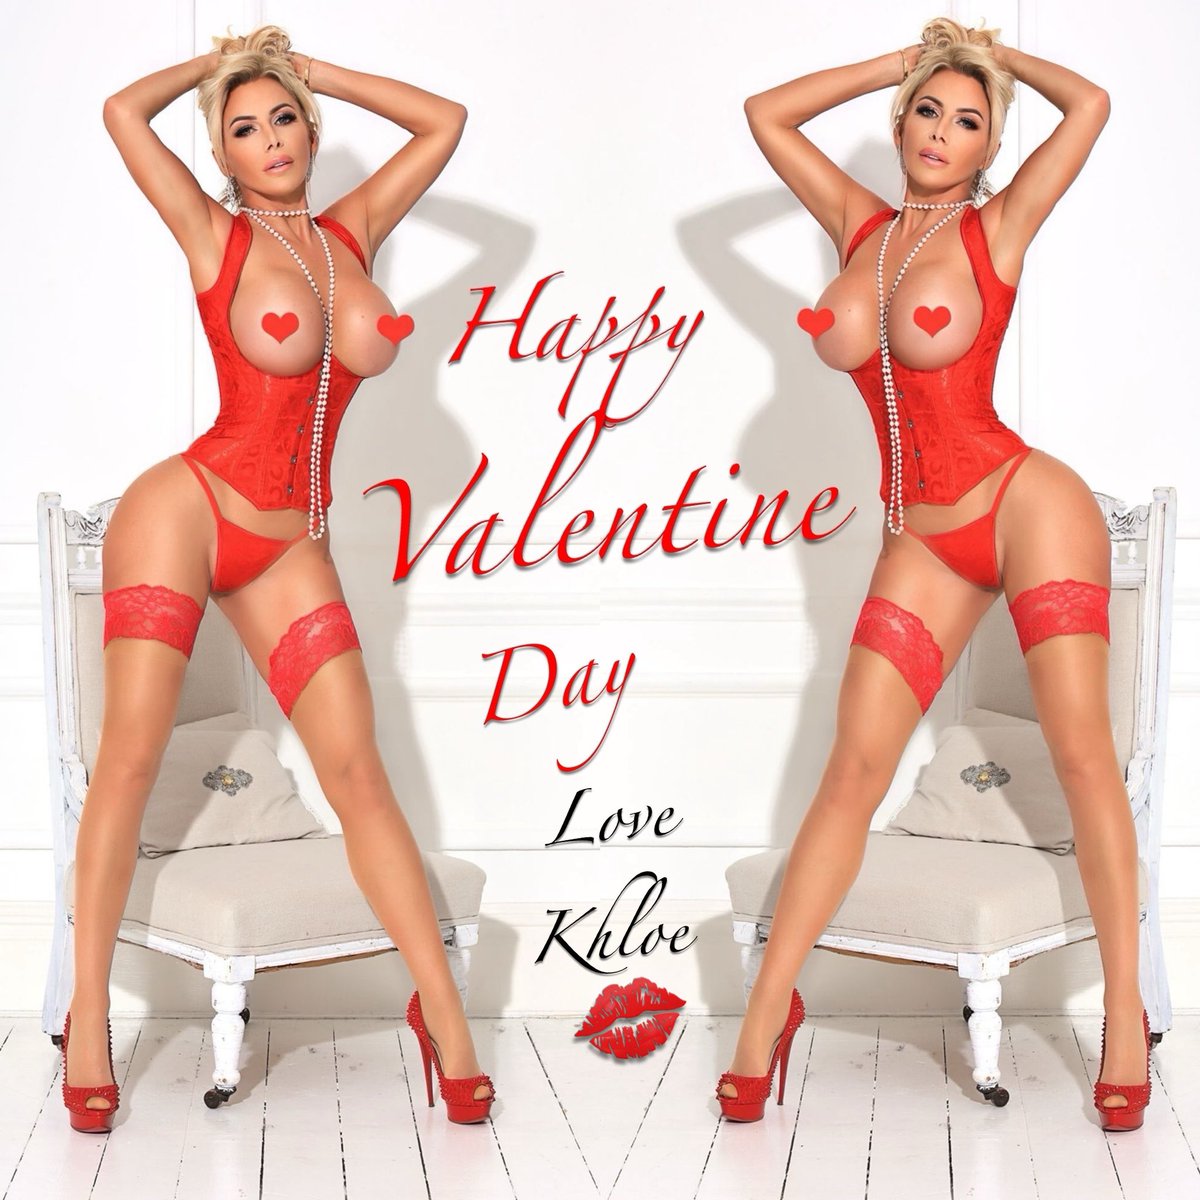 ❤️VALENTINE LOVE❤️ ✨BRING YOUR LIPS💋 TO MY LIPS💋✨ 📸@MikeCohenTOG Double trouble Khloe wishes everyone a sexy Valentine 😈❤️